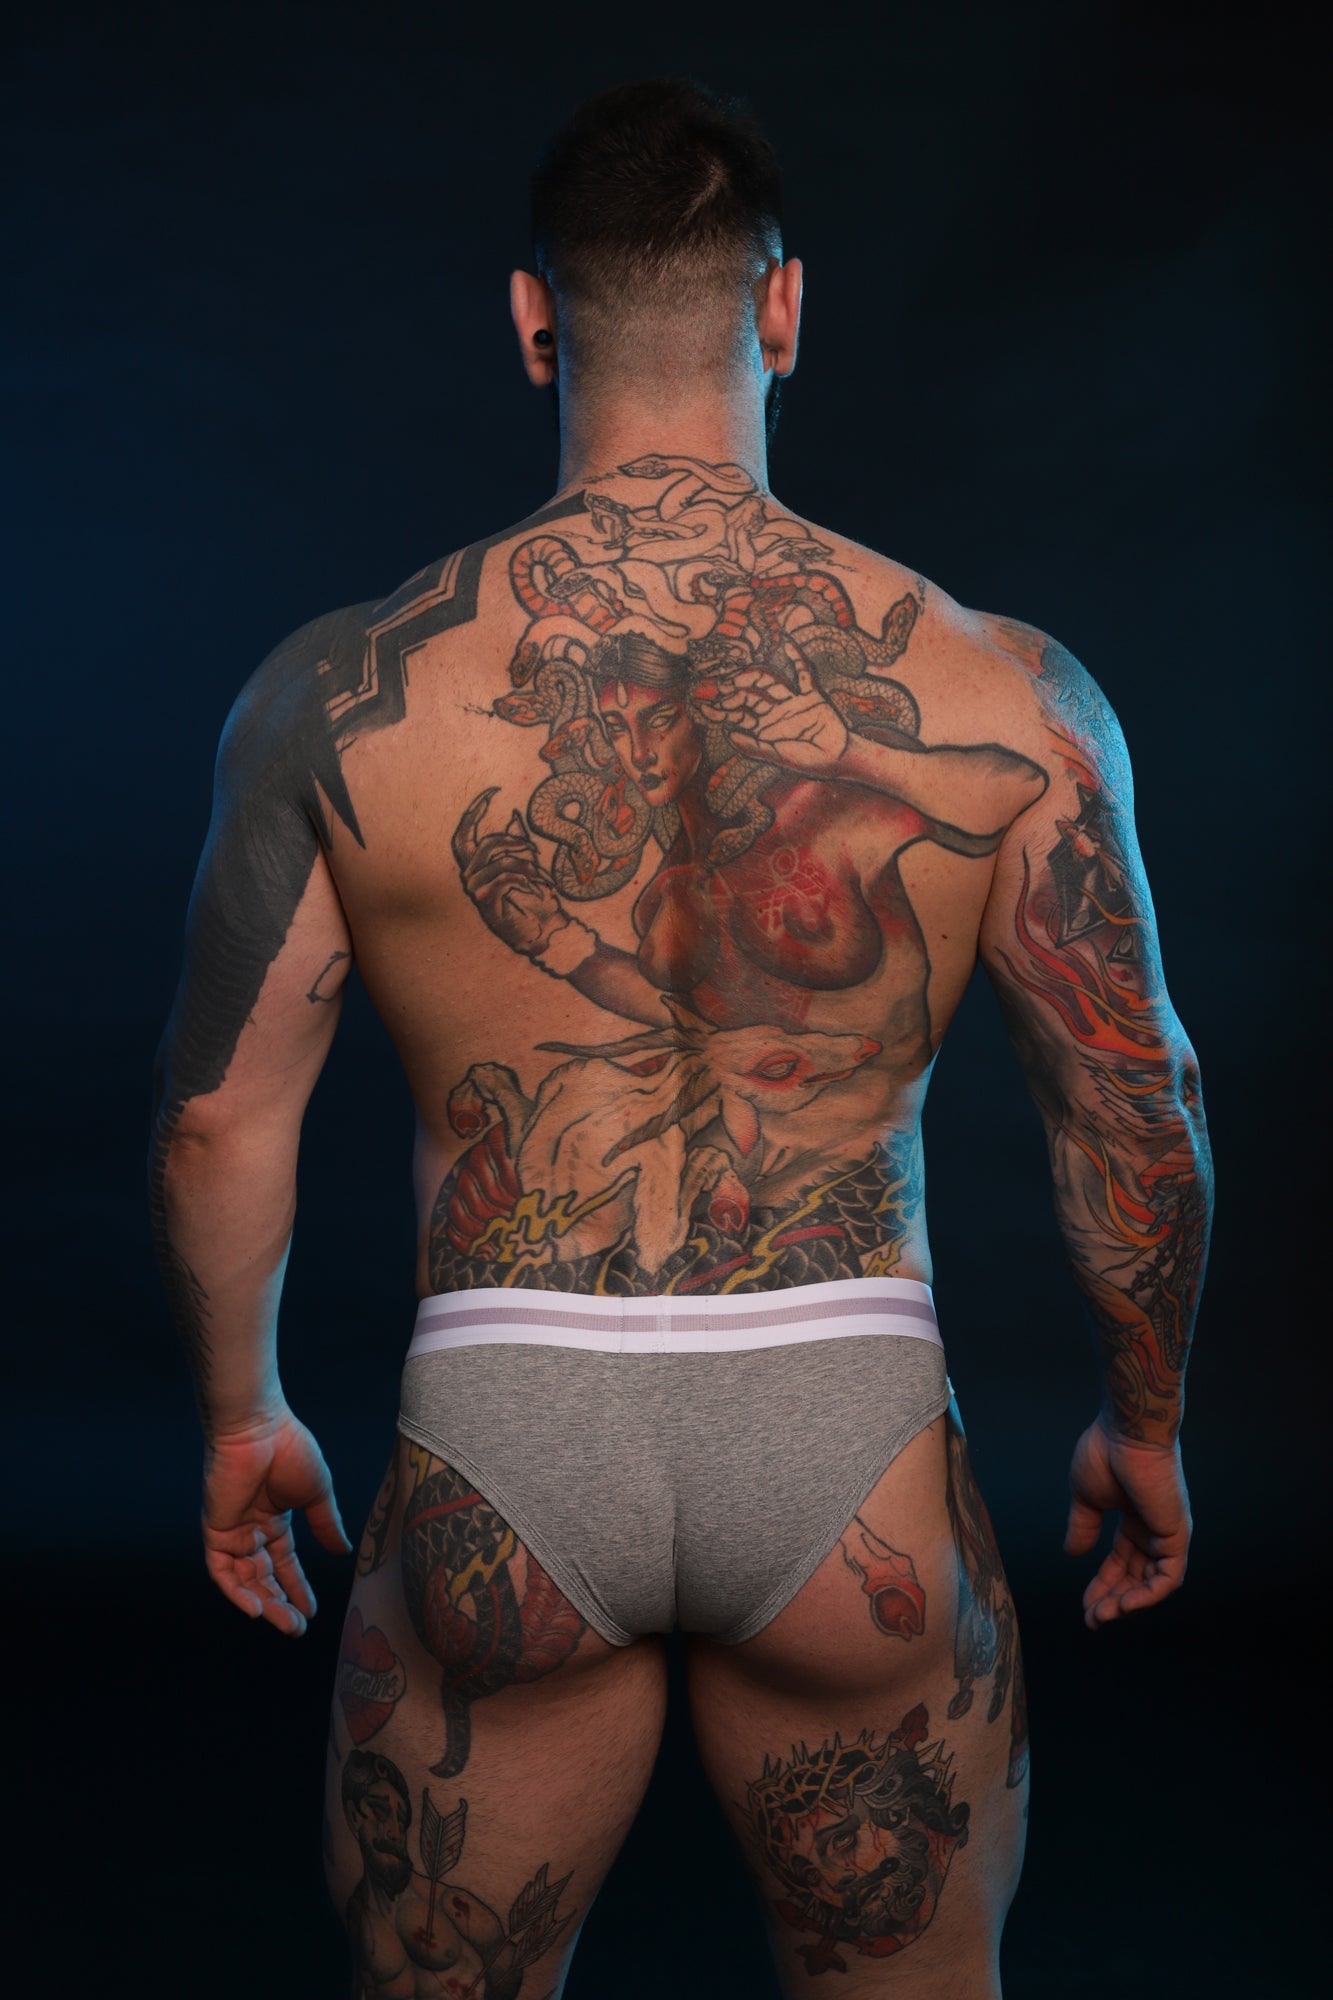 A model for Twisted Beast showing the Insignia Brief's in grey from behind.